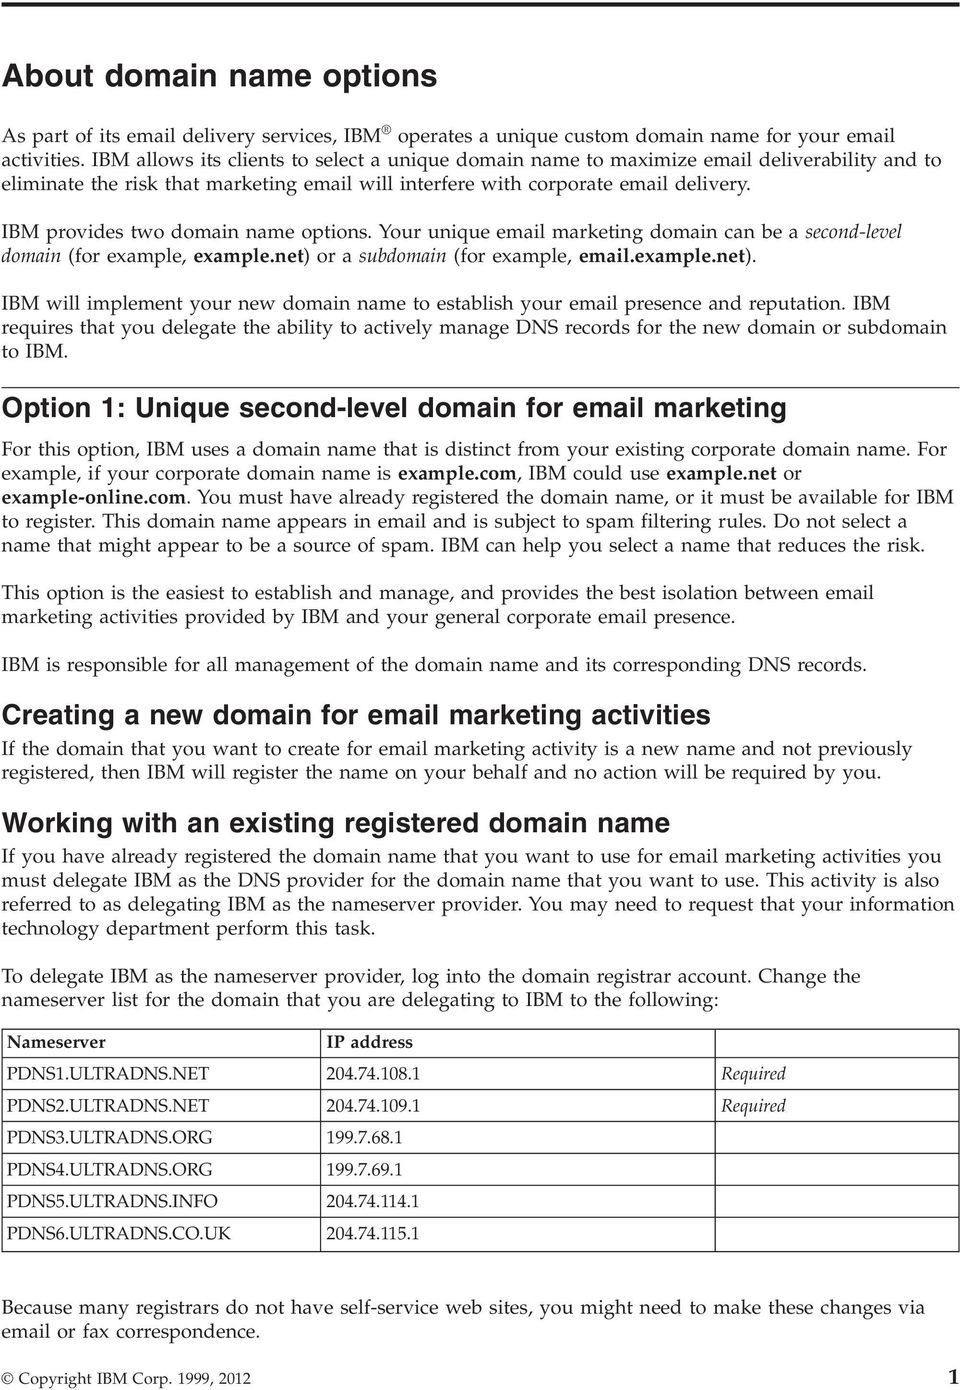 IBM provides two domain name options. Your unique email marketing domain can be a second-level domain (for example, example.net) 